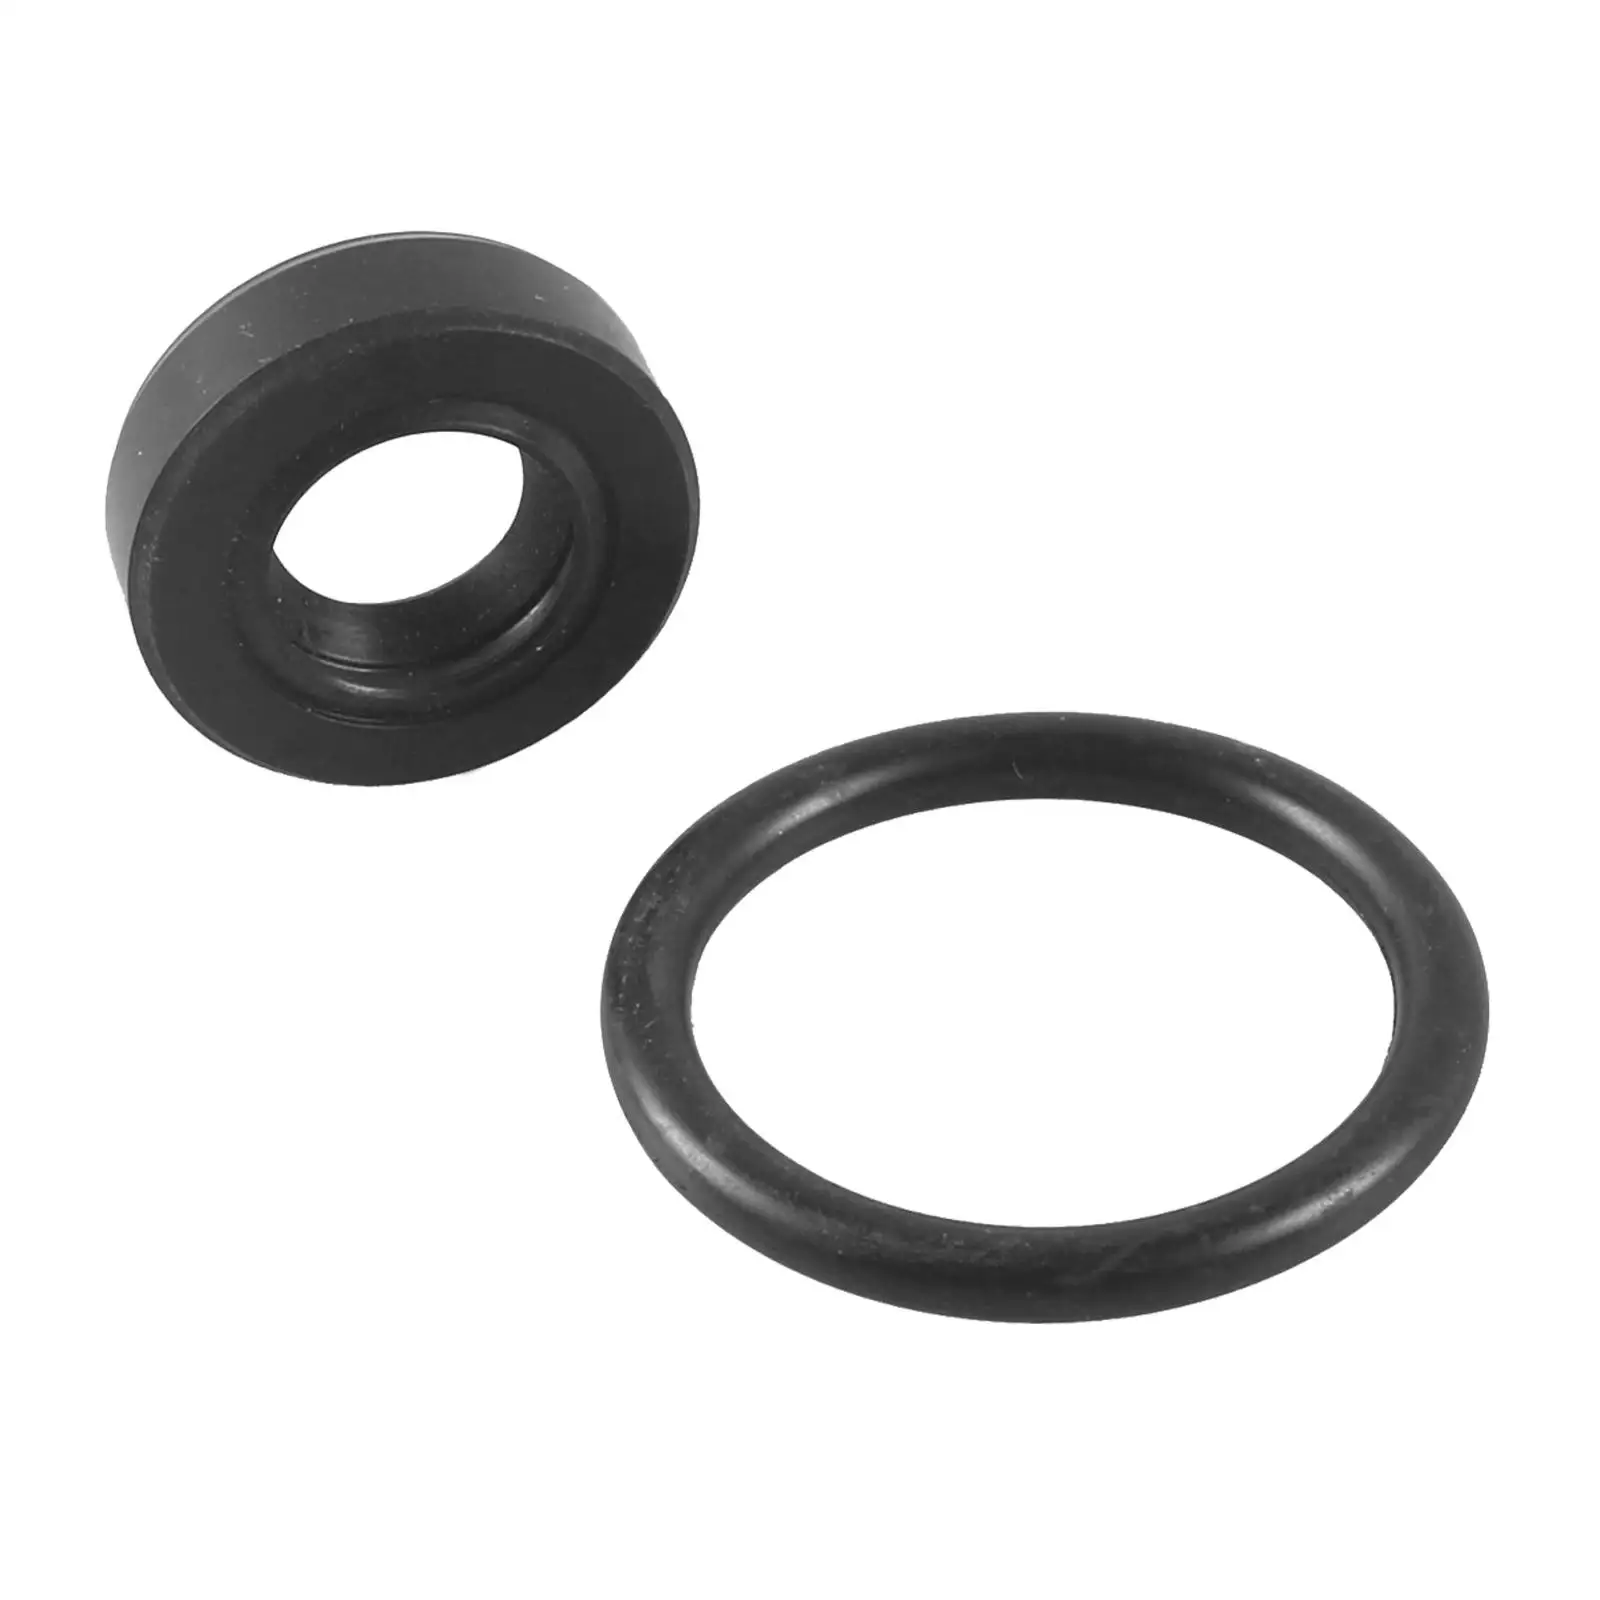 BH3888E0 Car Replacement Oil Distributor Seal Replace for Honda Accord 1990-1993